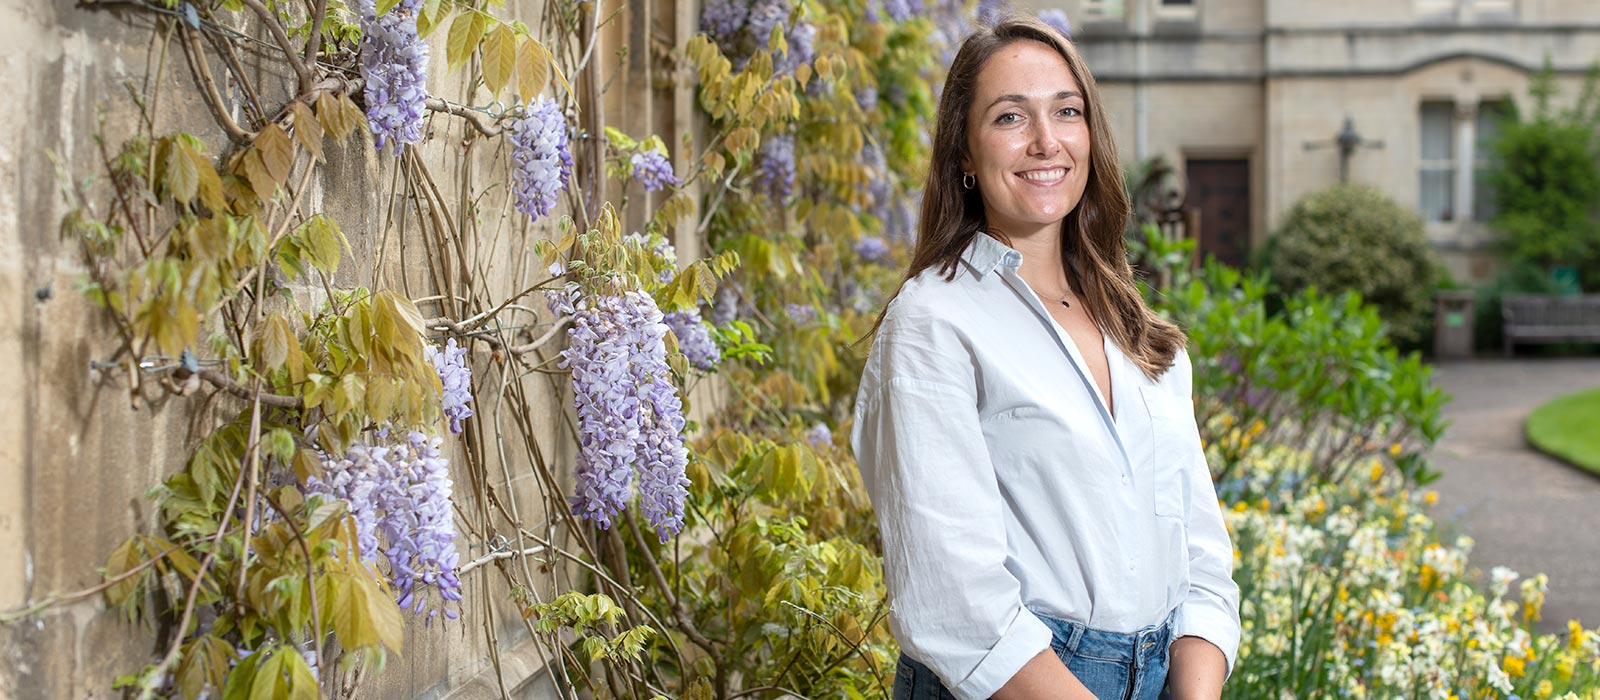 Lily Rodel stands in front of a wisteria-clad wall in the grounds of Balliol College